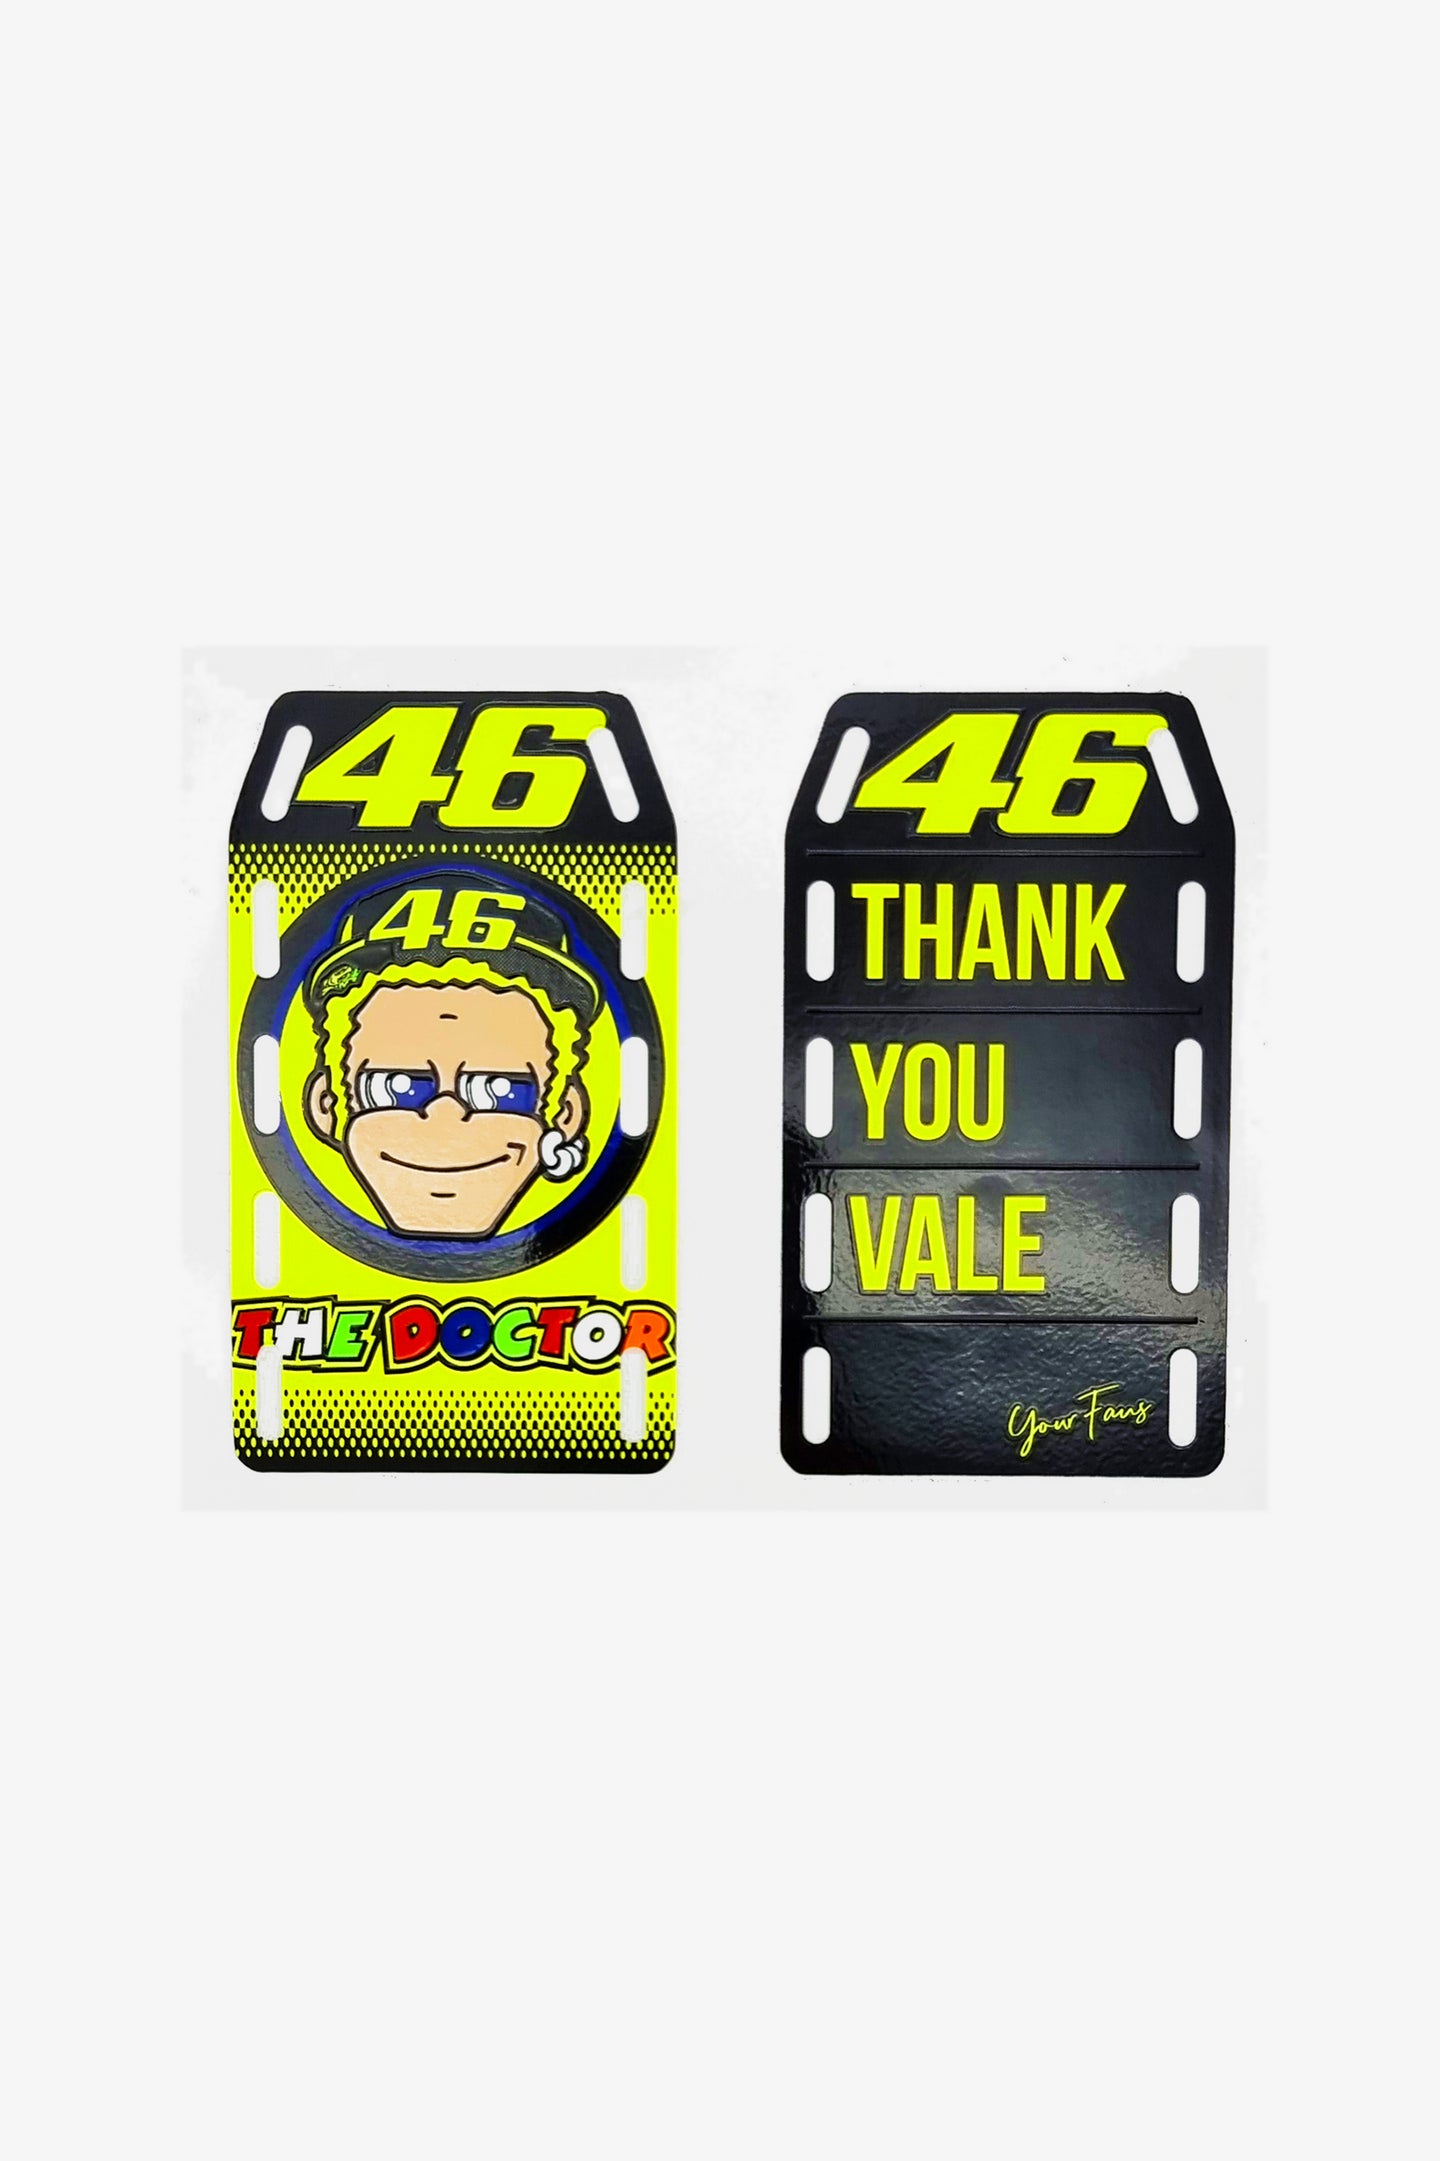 VR 46 Valentino Rossi The Doctor Helmet Decal Set Stickers